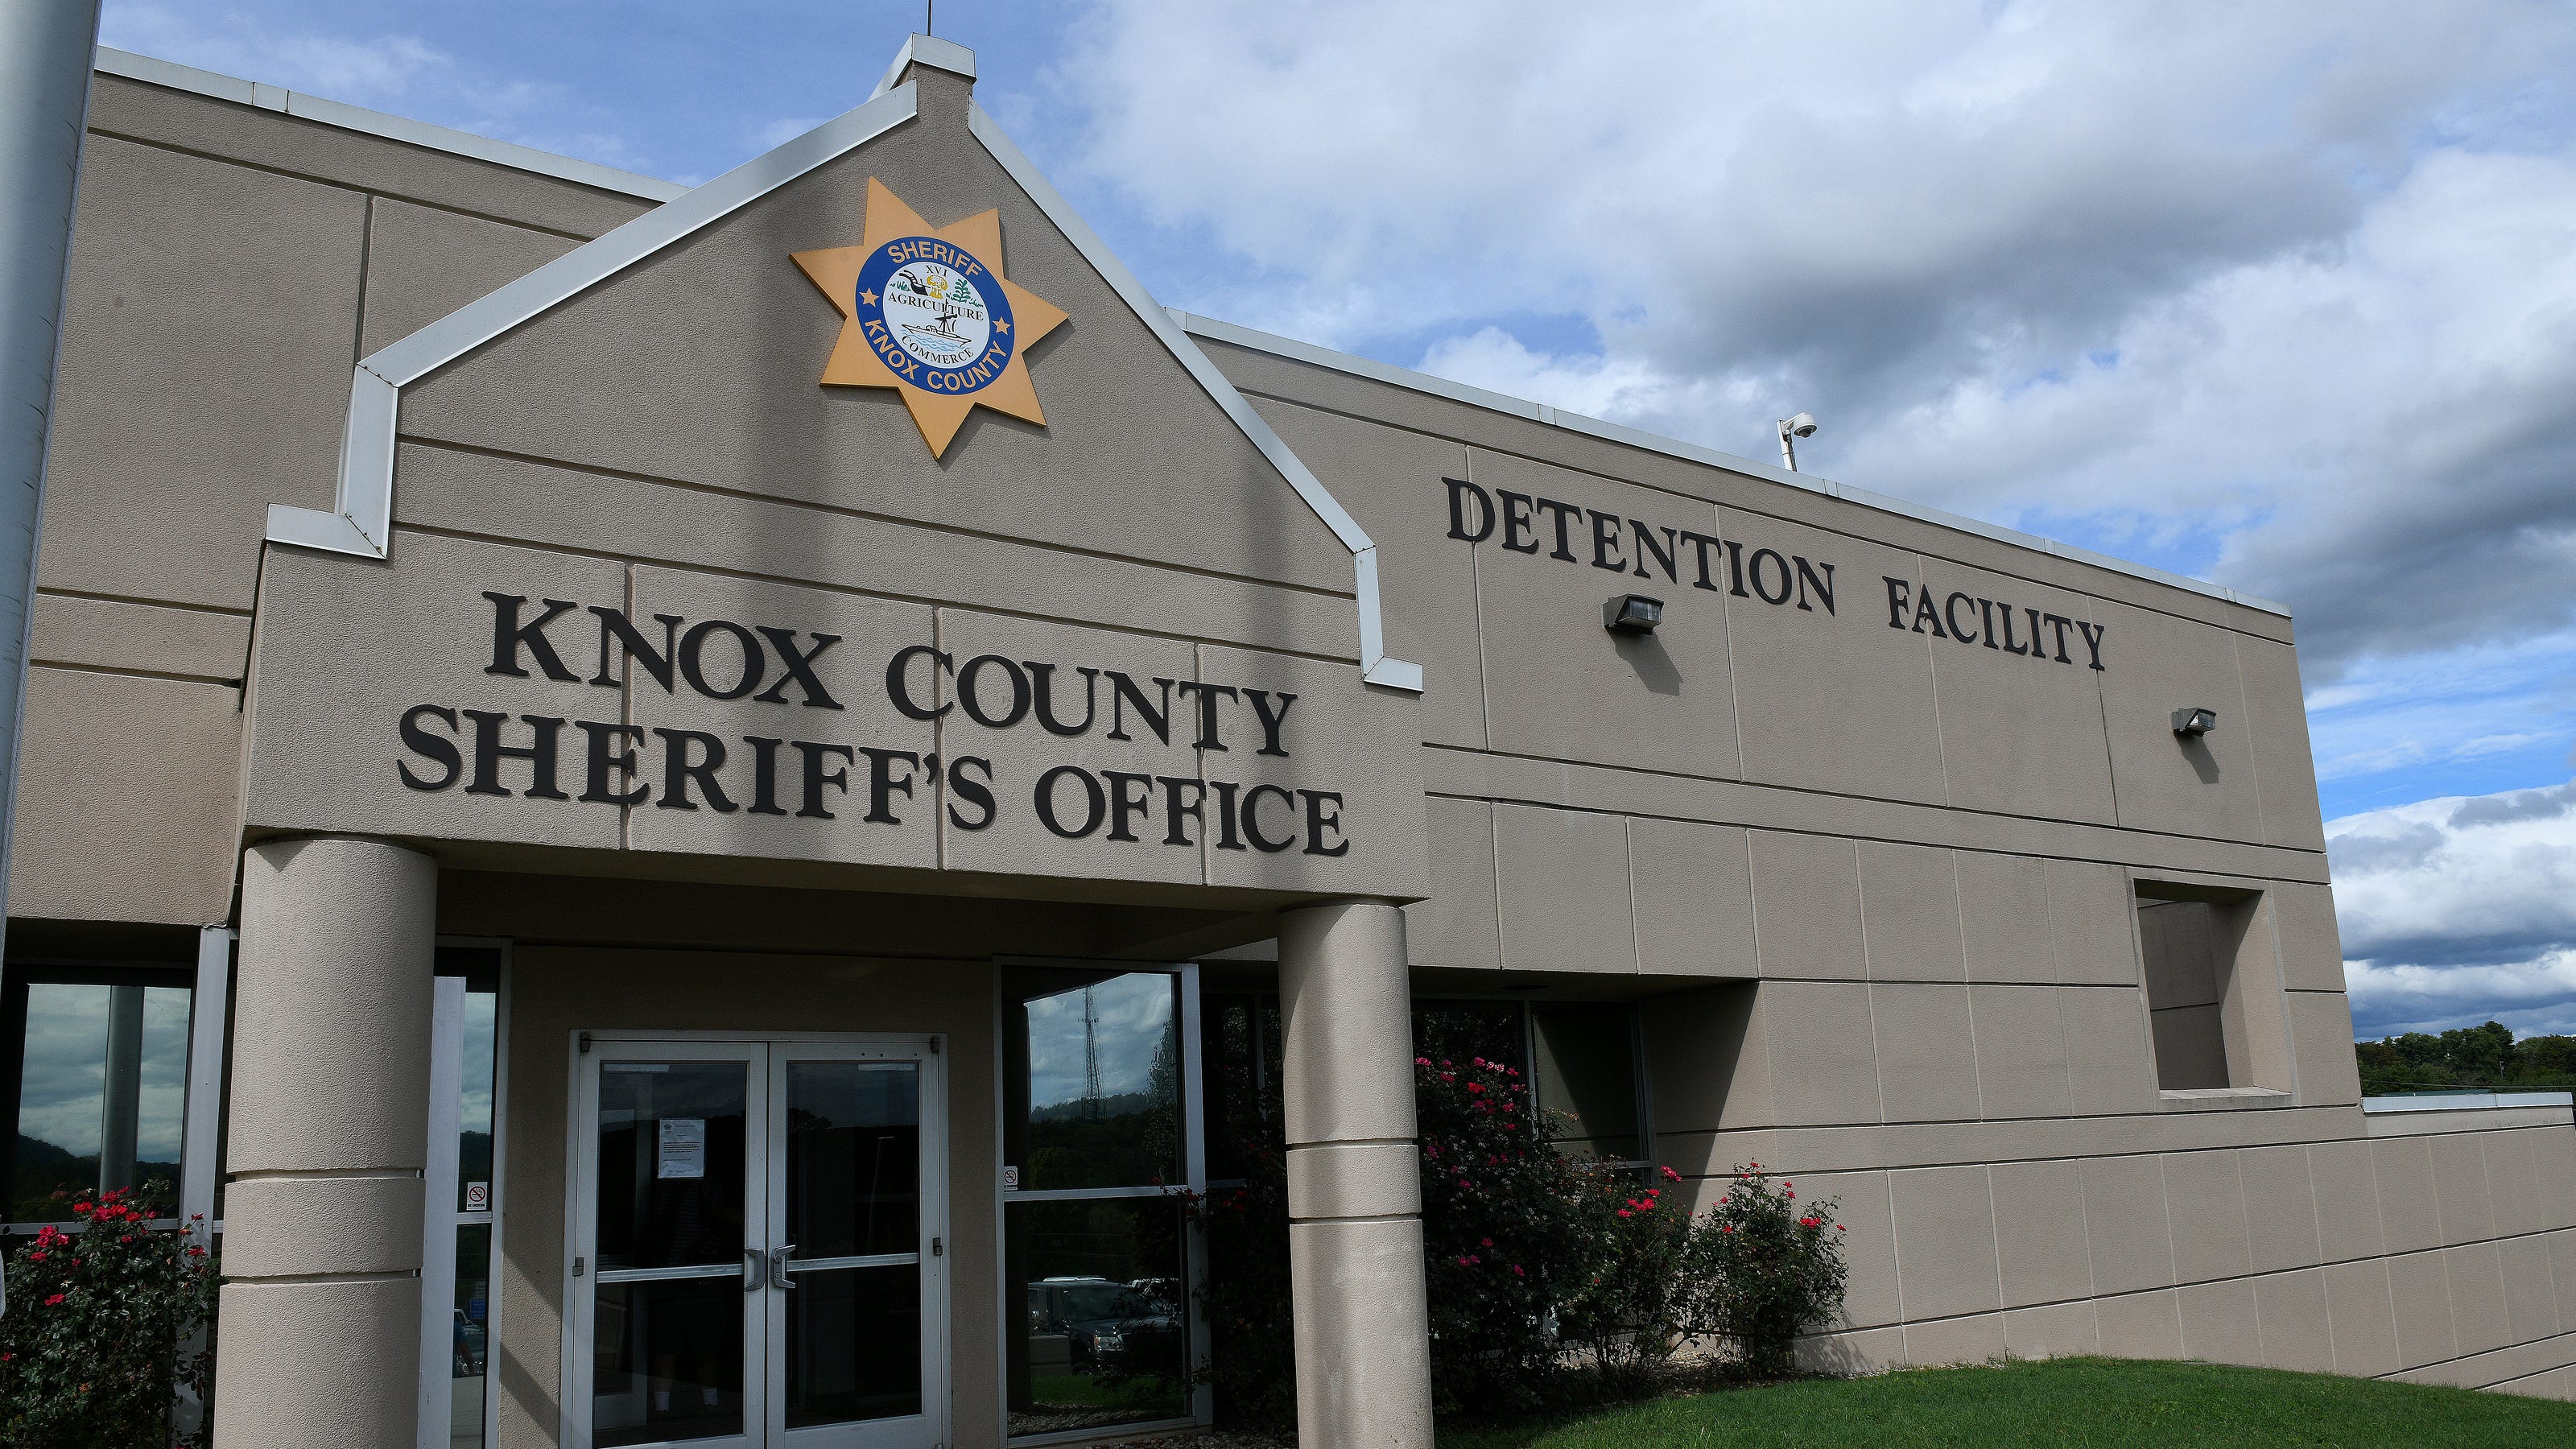 Knox County Sheriff's Office 'wrongly denied' access to open records